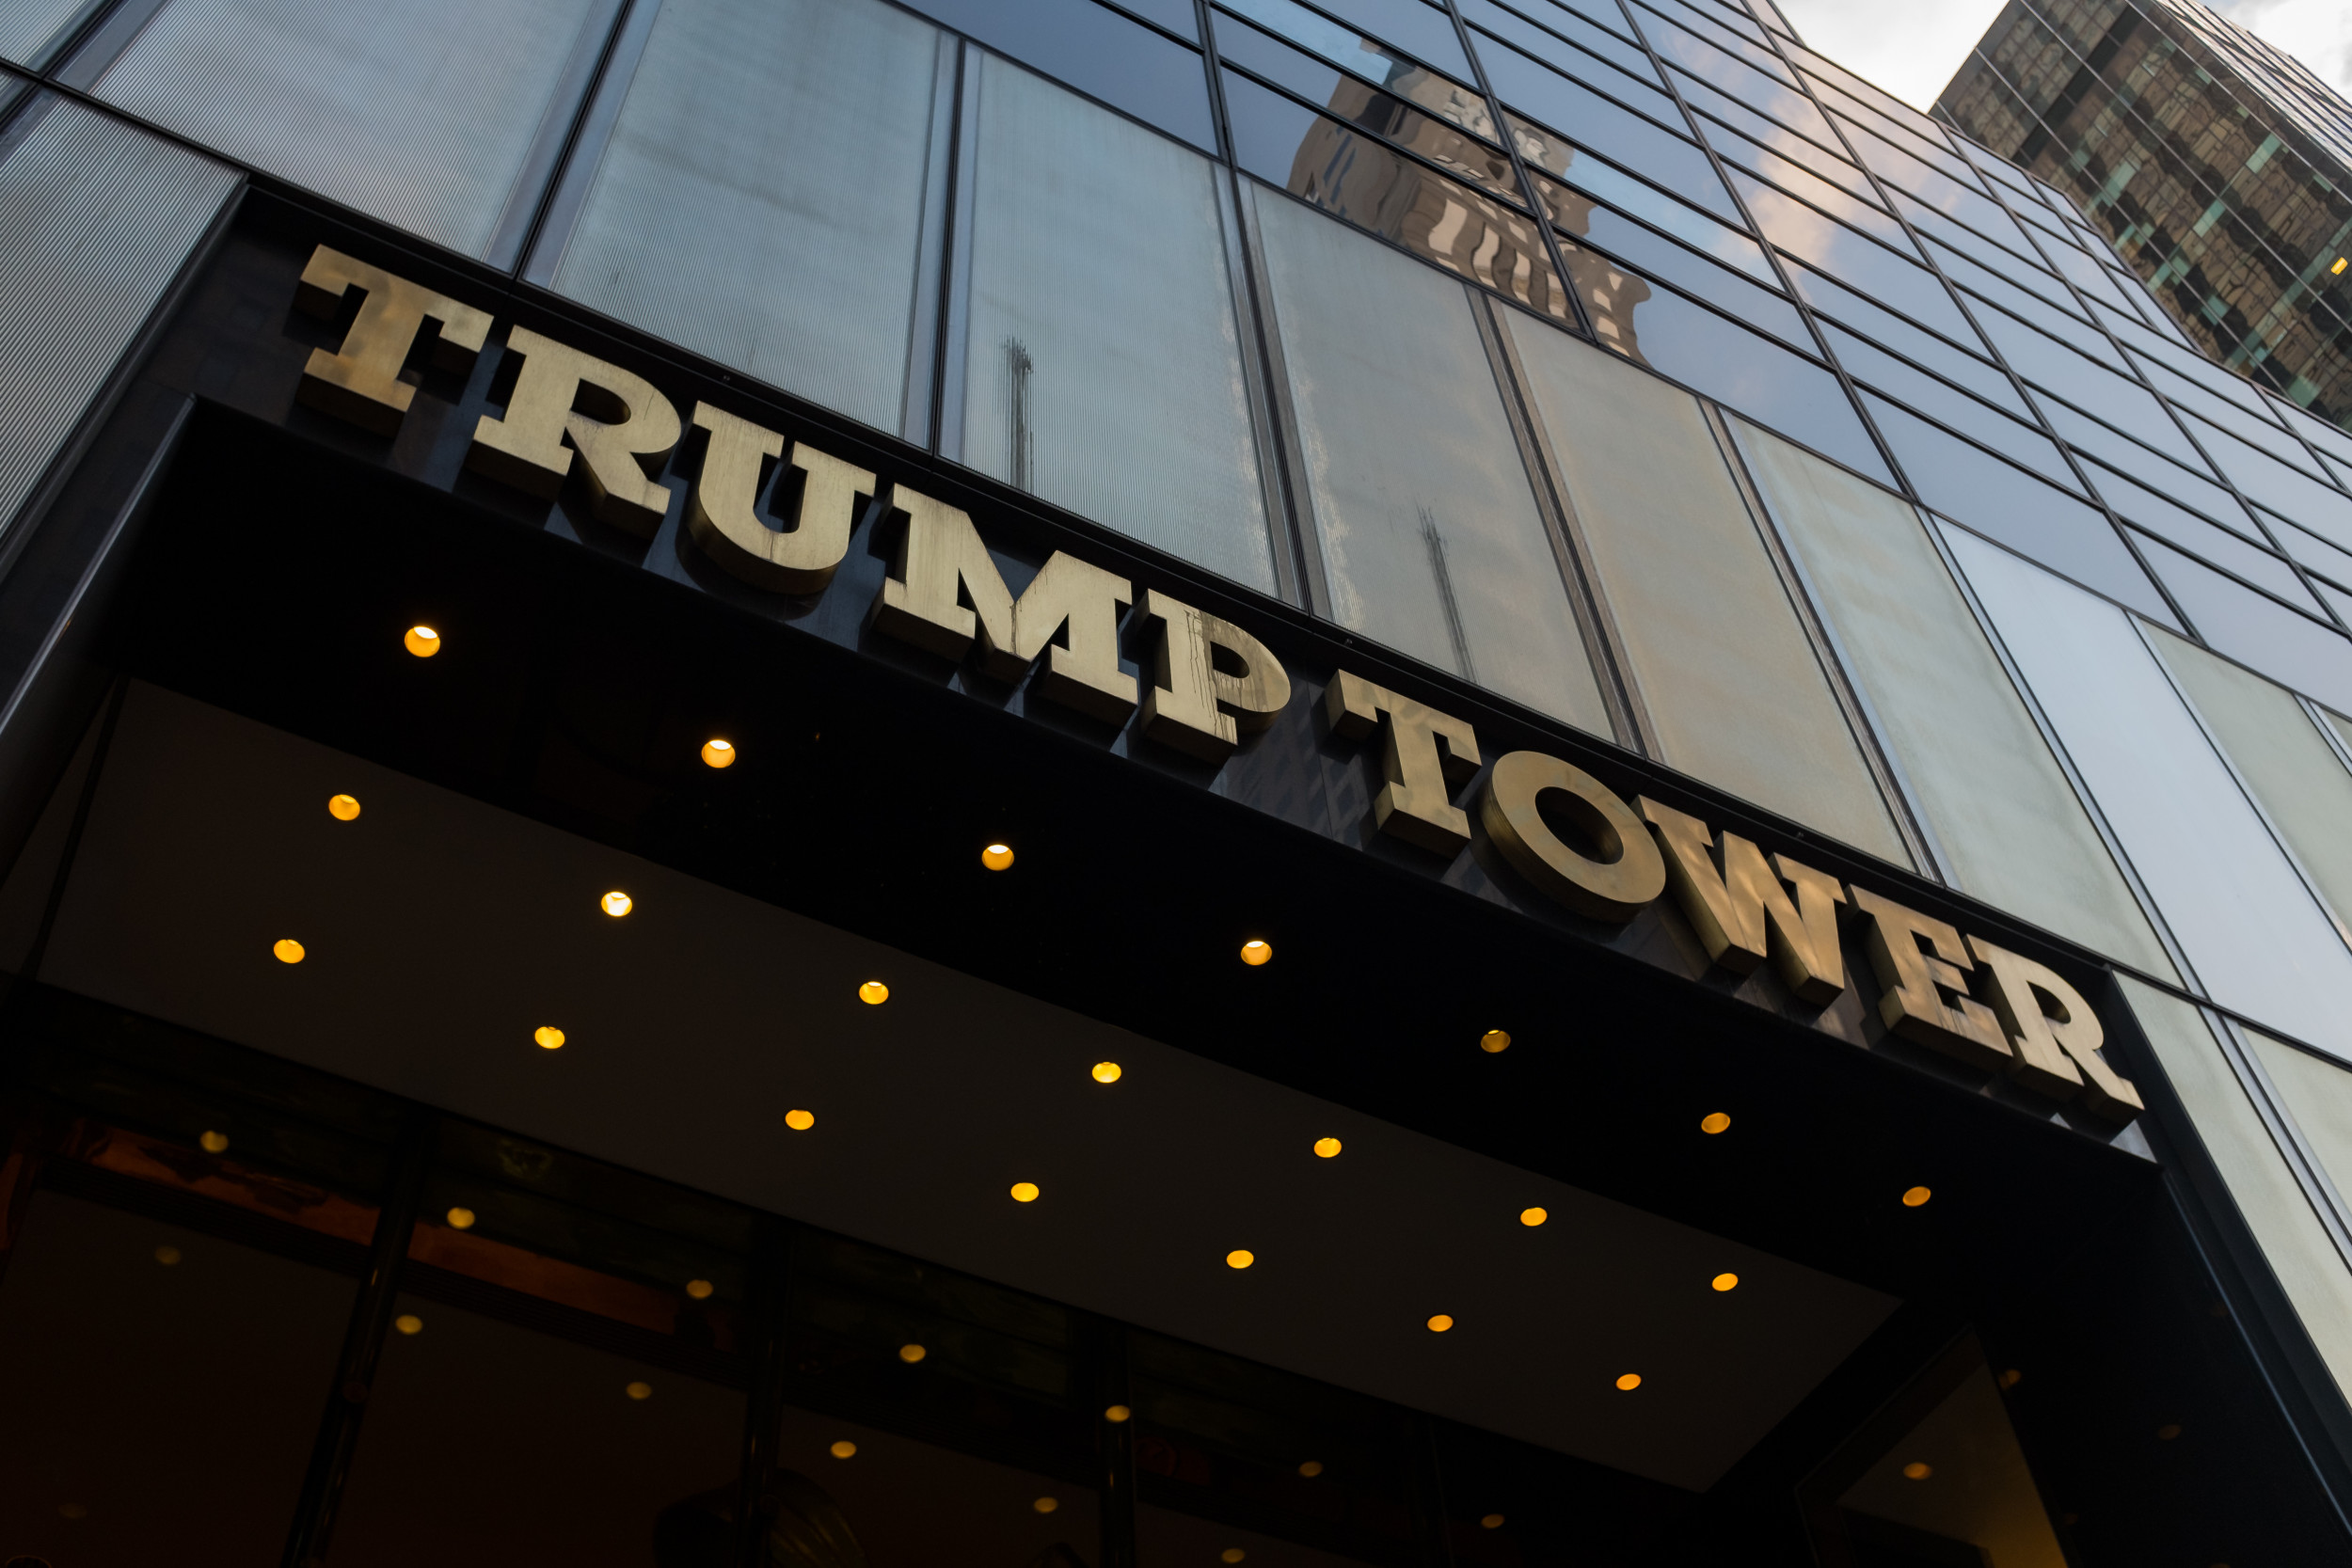 Trump tower owners are dropping prices